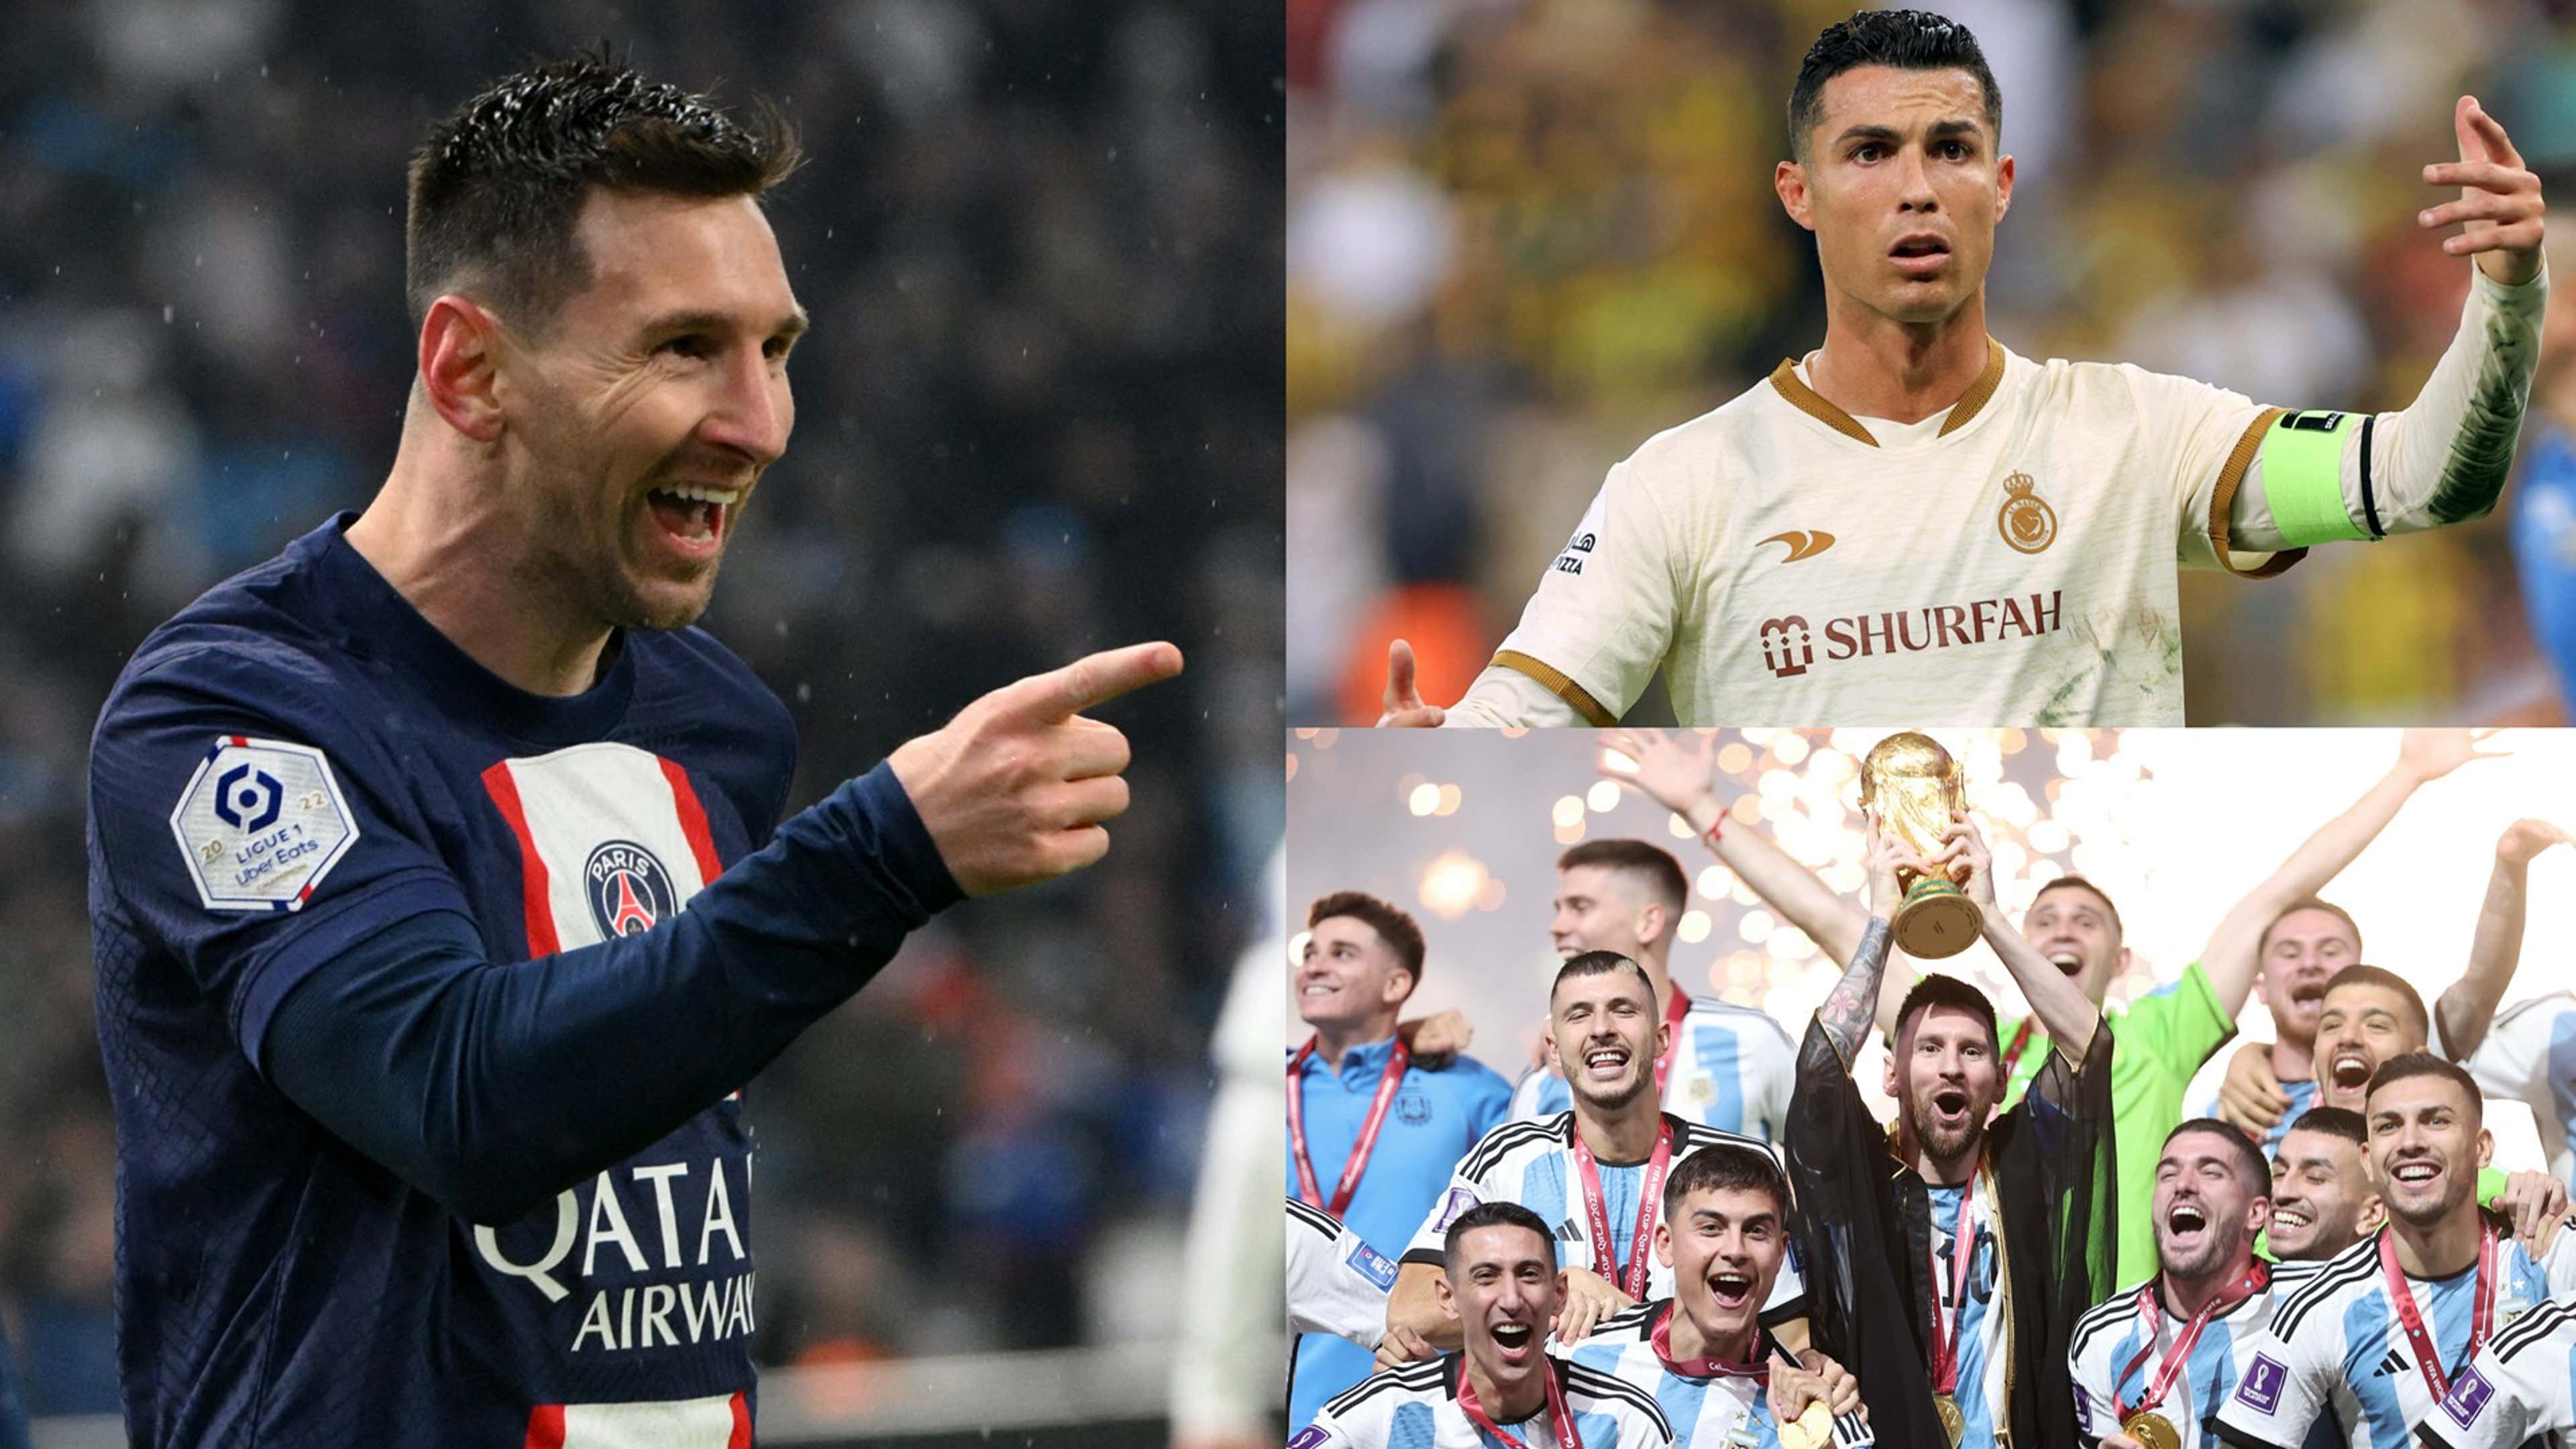 PSG: Lionel Messi & Cristiano Ronaldo Could Play Together Next Season